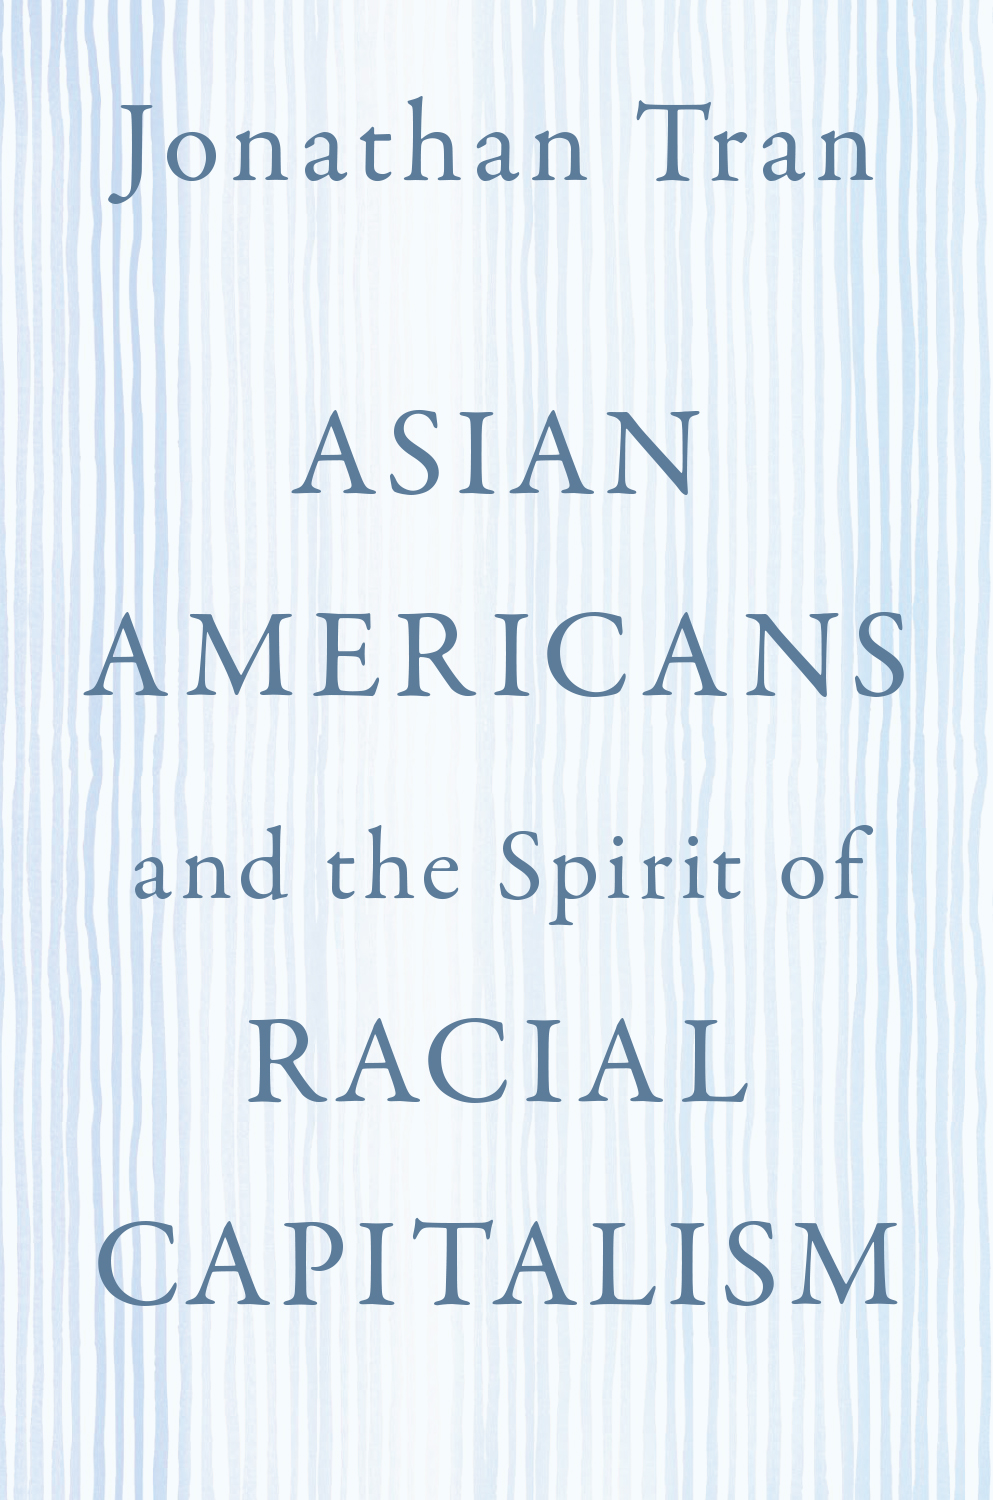 A New Book on Asian Americans and Race by Jonathan Tran